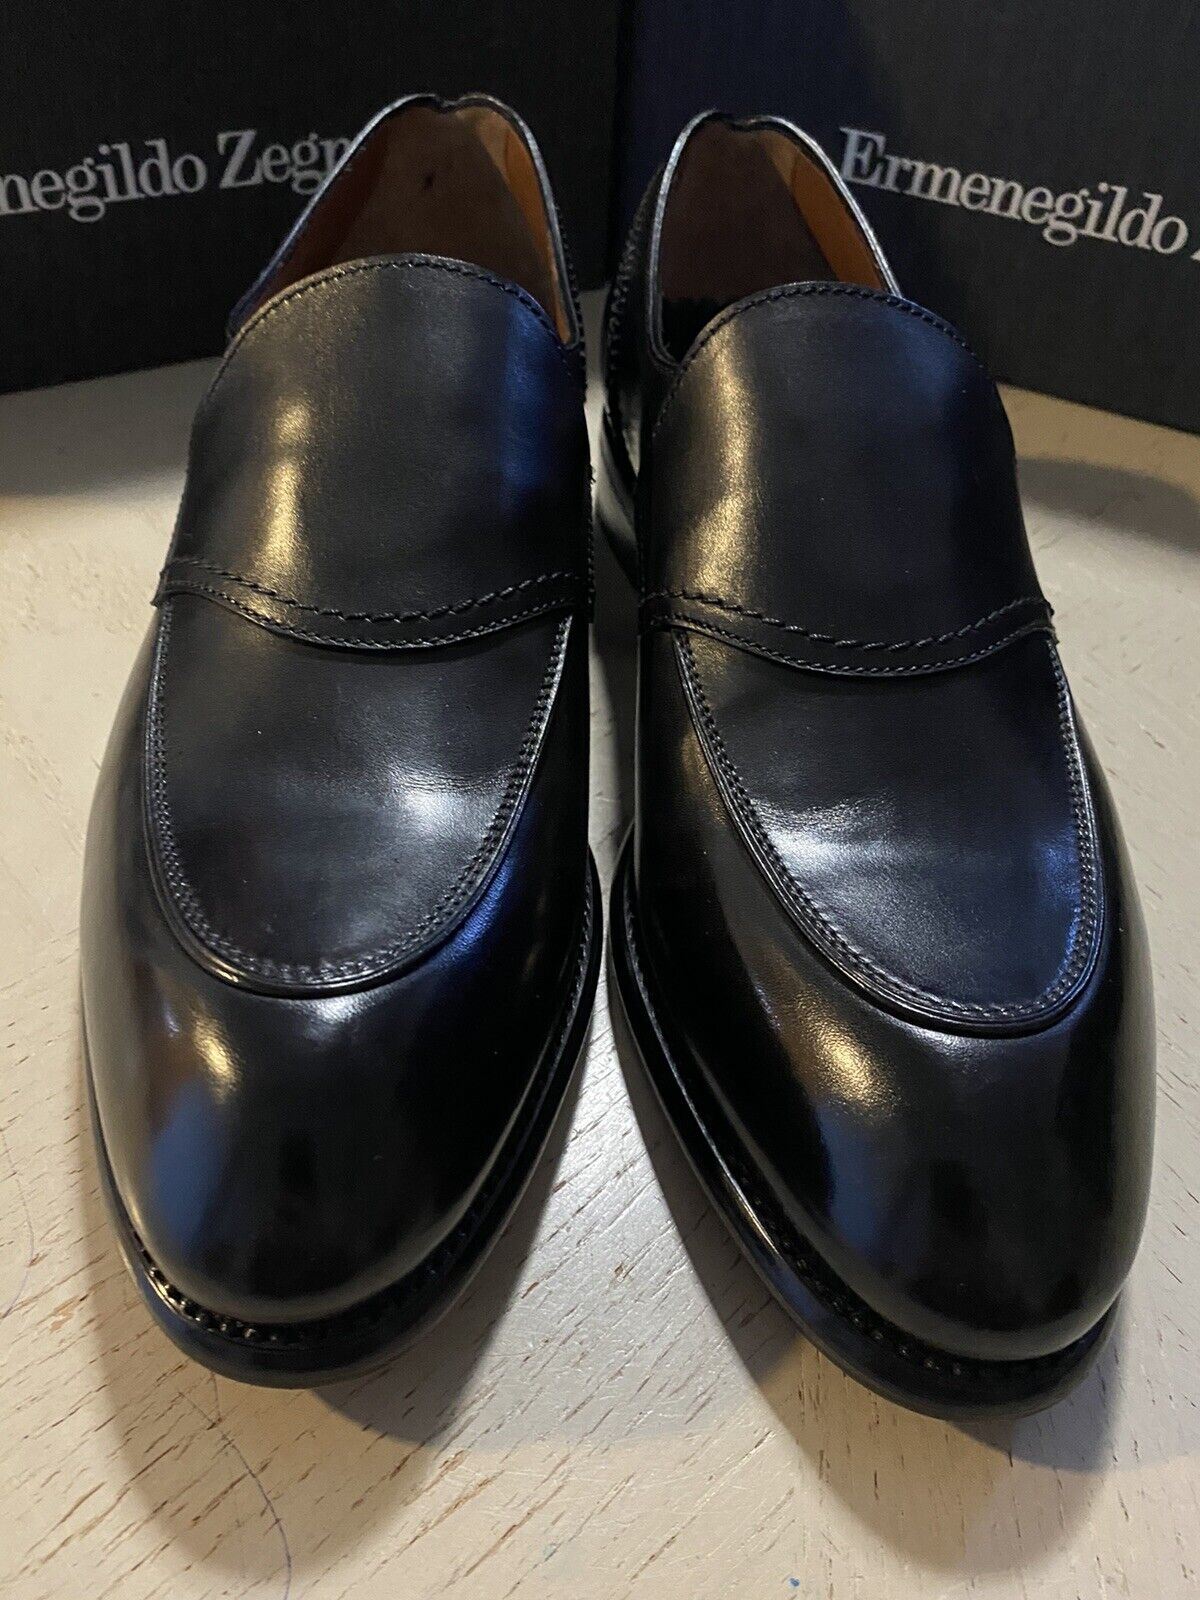 New $1250 Ermenegildo Zegna Couture Leather Loafers Shoes Black 9.5 US Italy